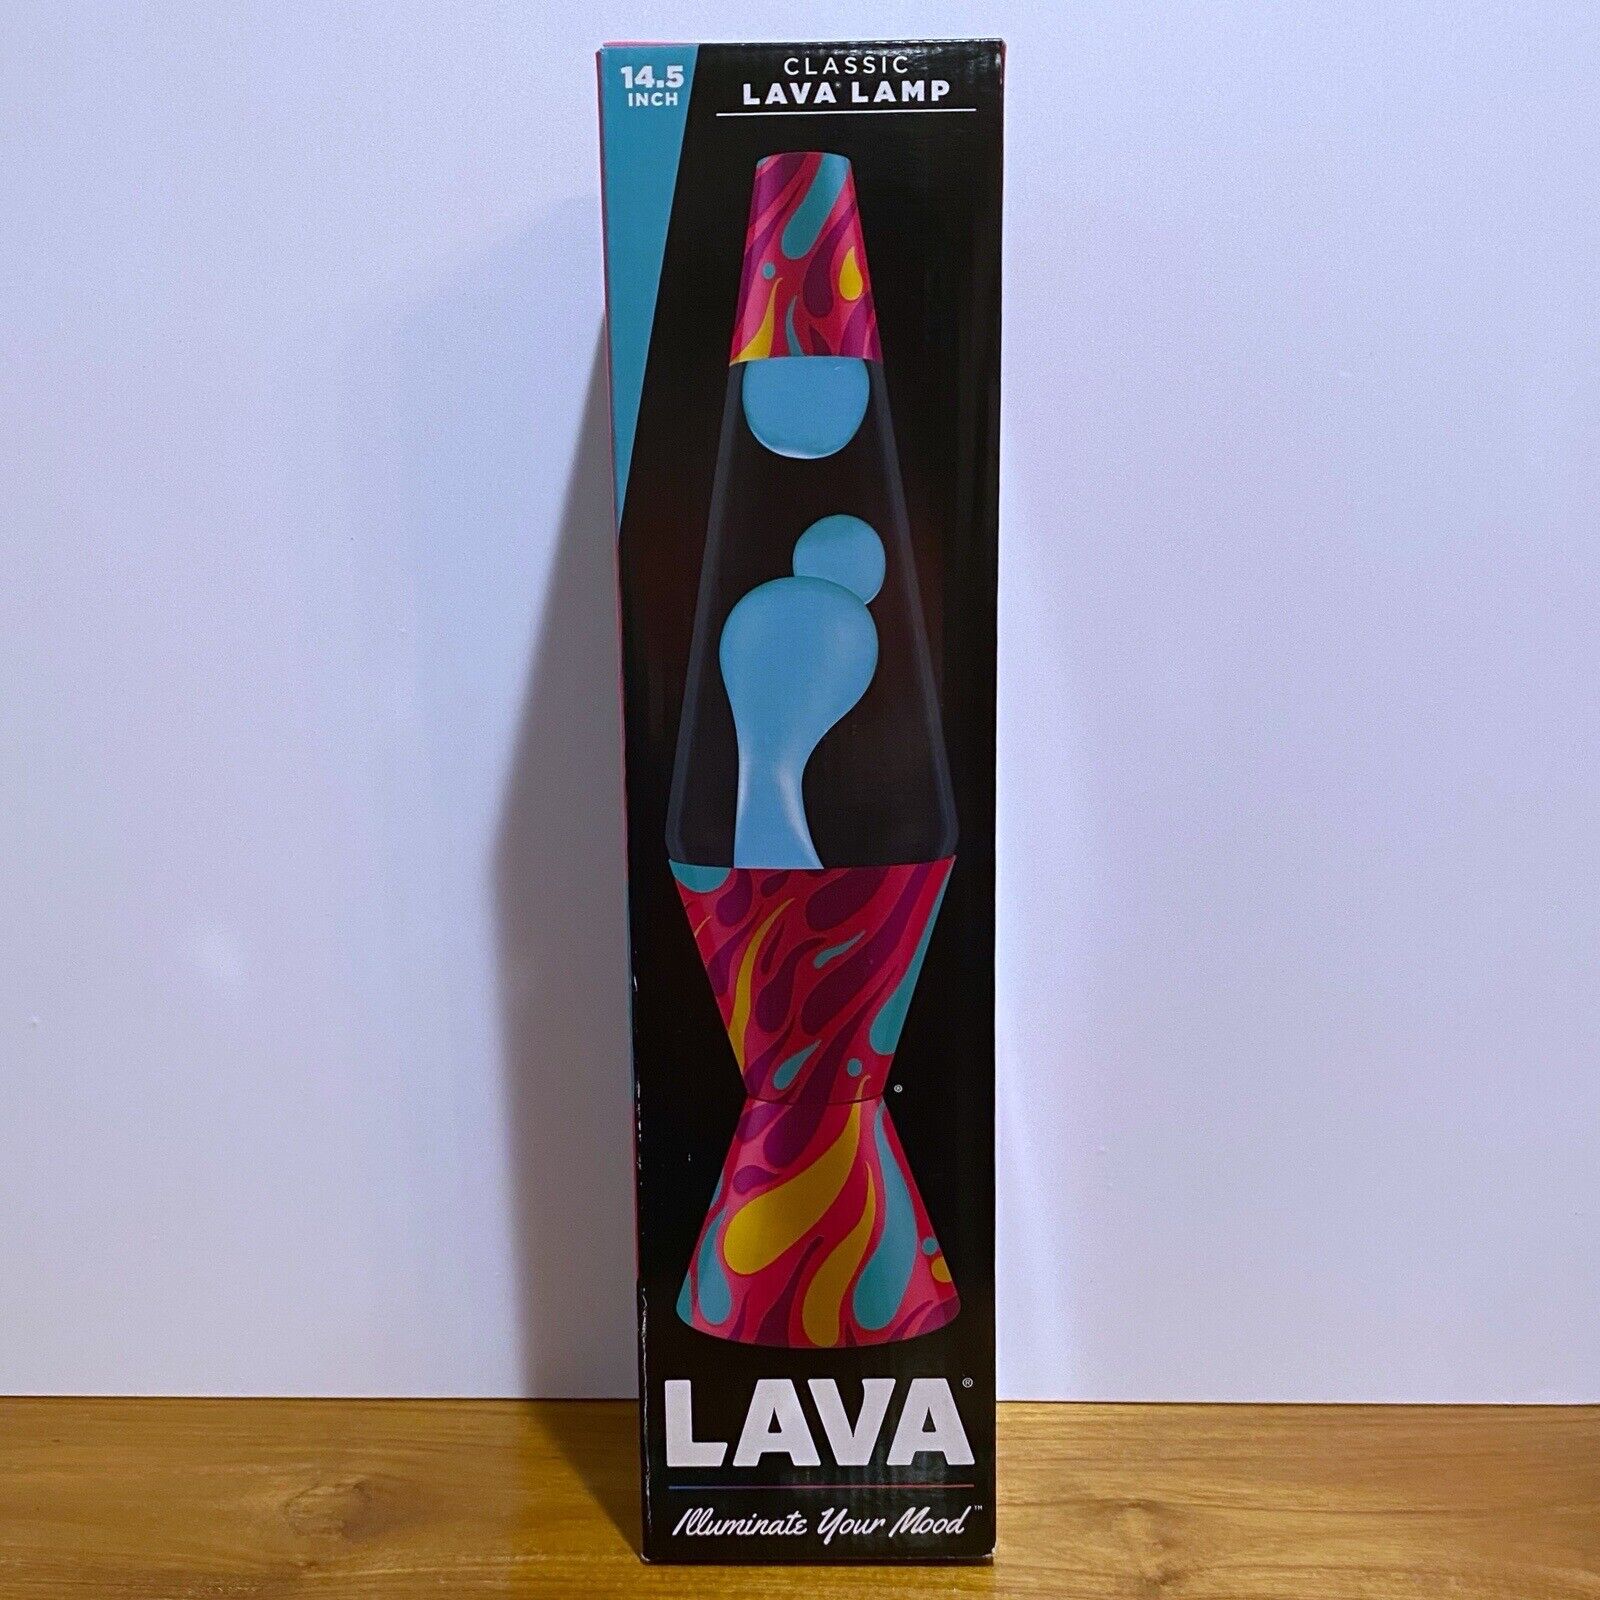 14.5” Turquoise Wax & Clear Liquid Lava Lamp With  Colorful Fiery Decal On Base